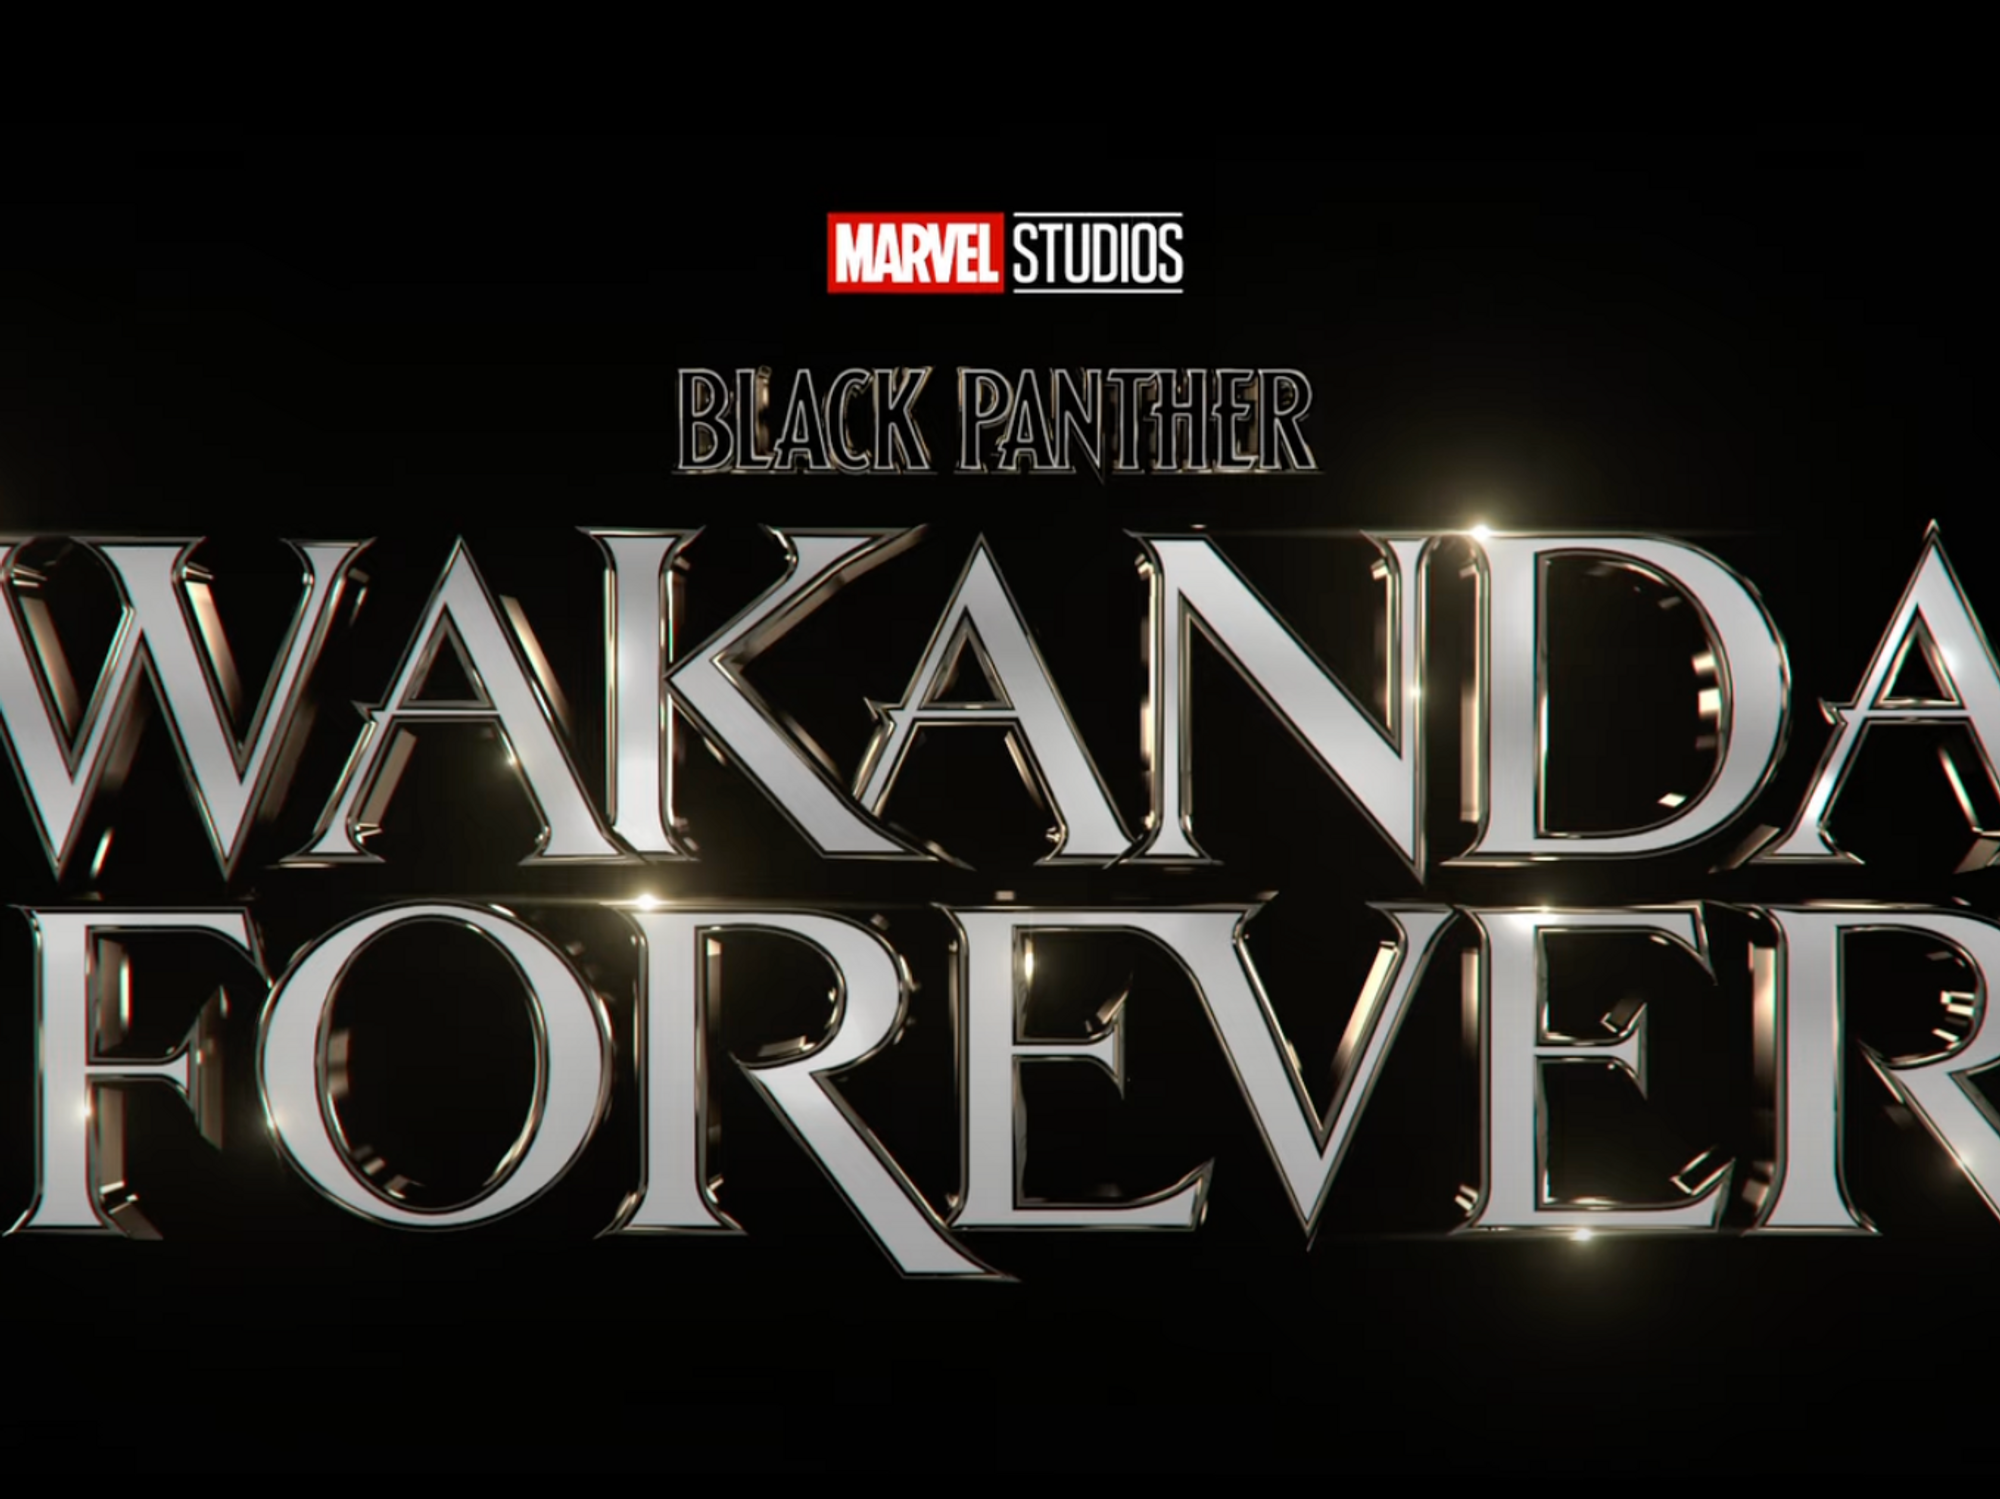 The Latest 'Wakanda Forever' Trailer Unveils New Female Black Panther